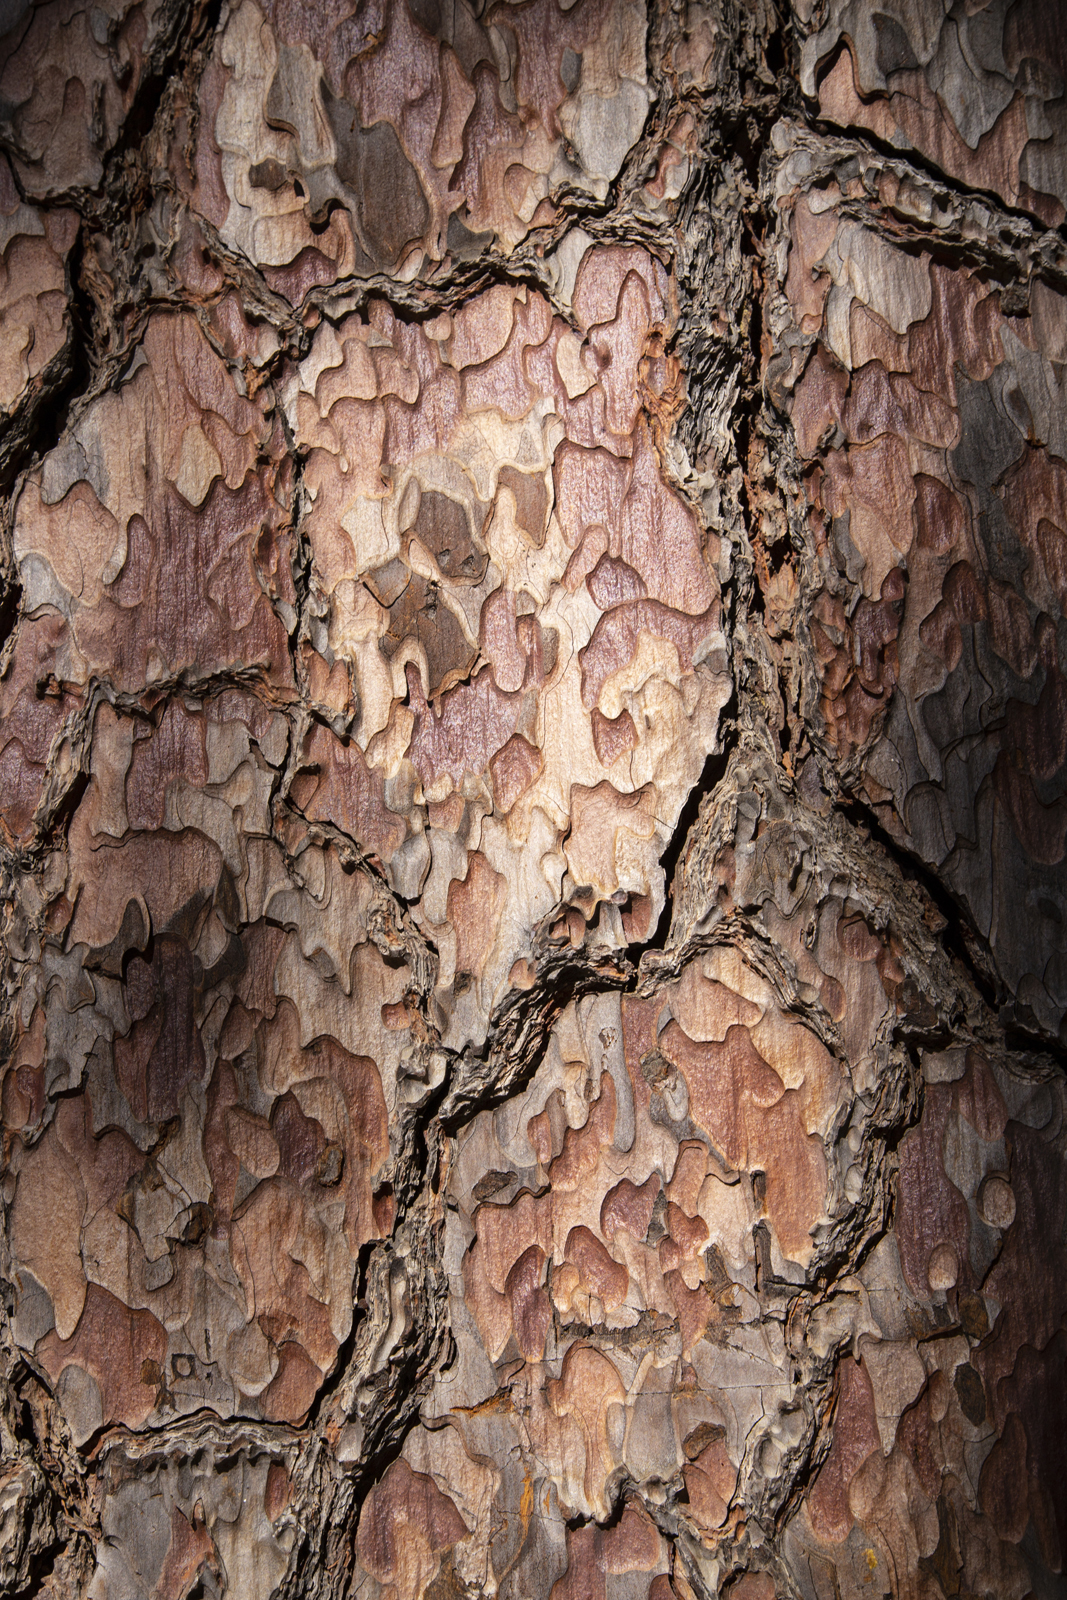  The bark of a tree in the Mariposa Grove at Yosemite National Park, California 